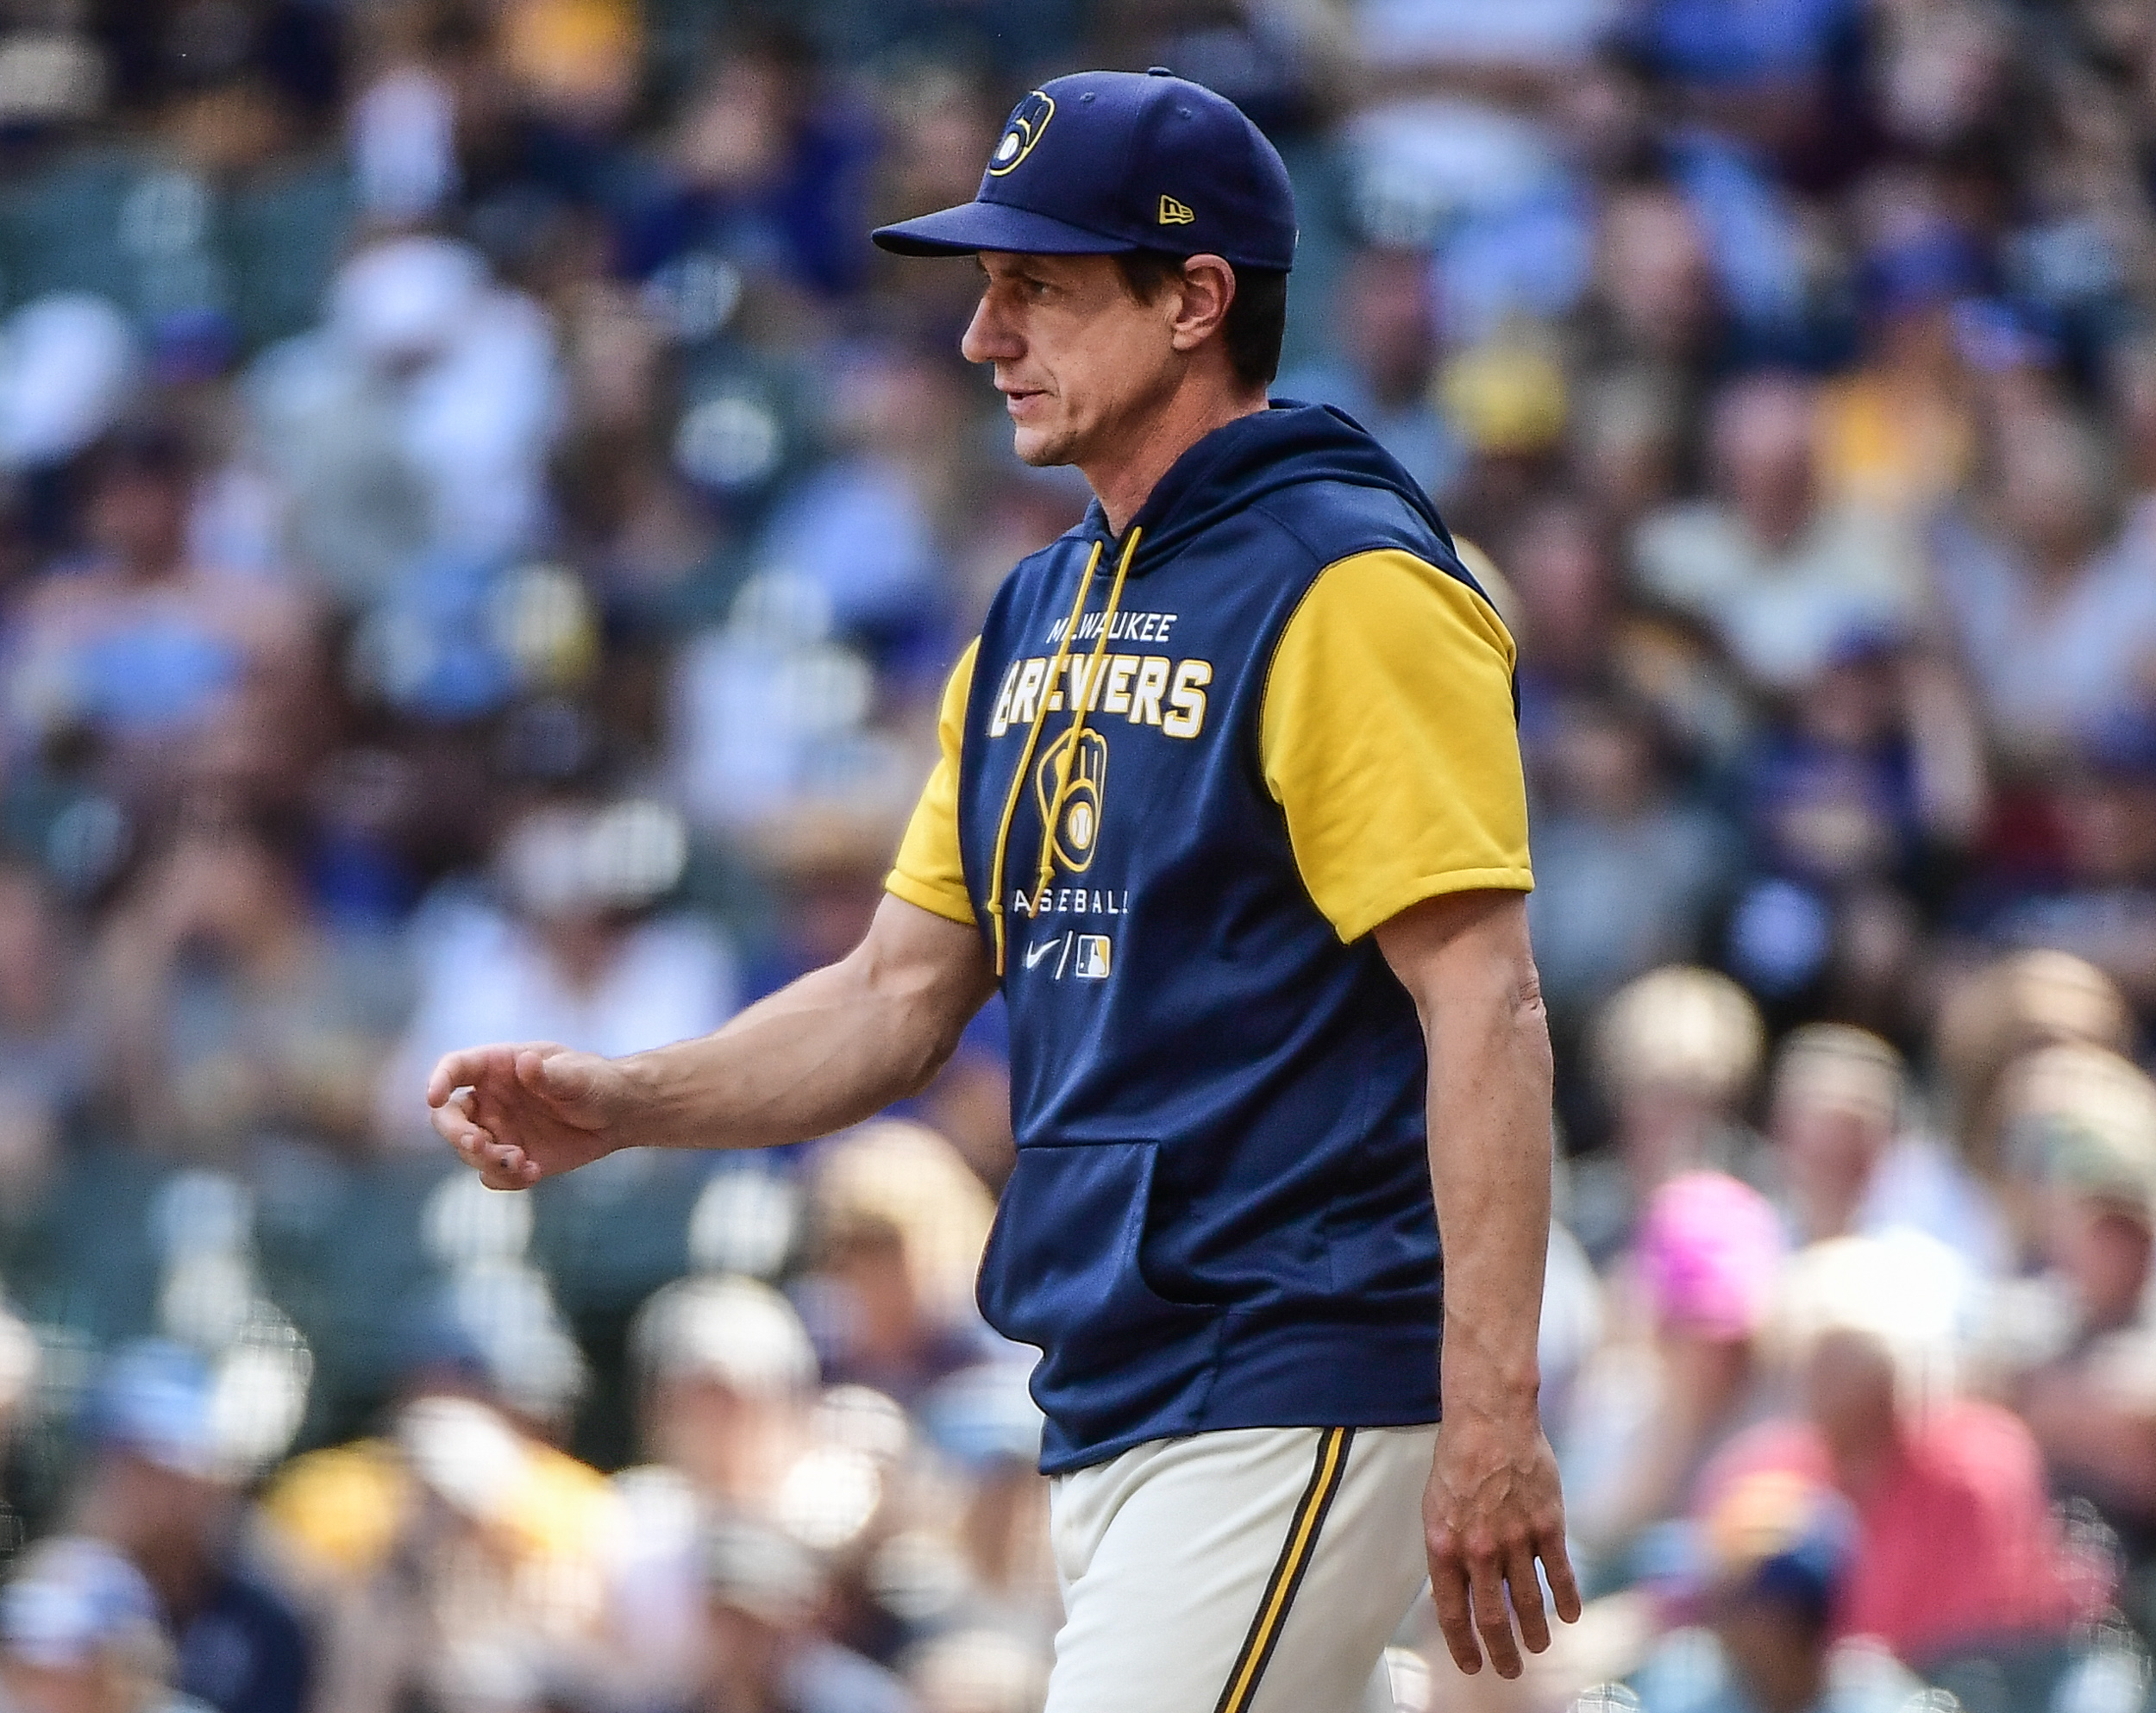 BREWERS: Manager Craig Counsell inks 3-year extension